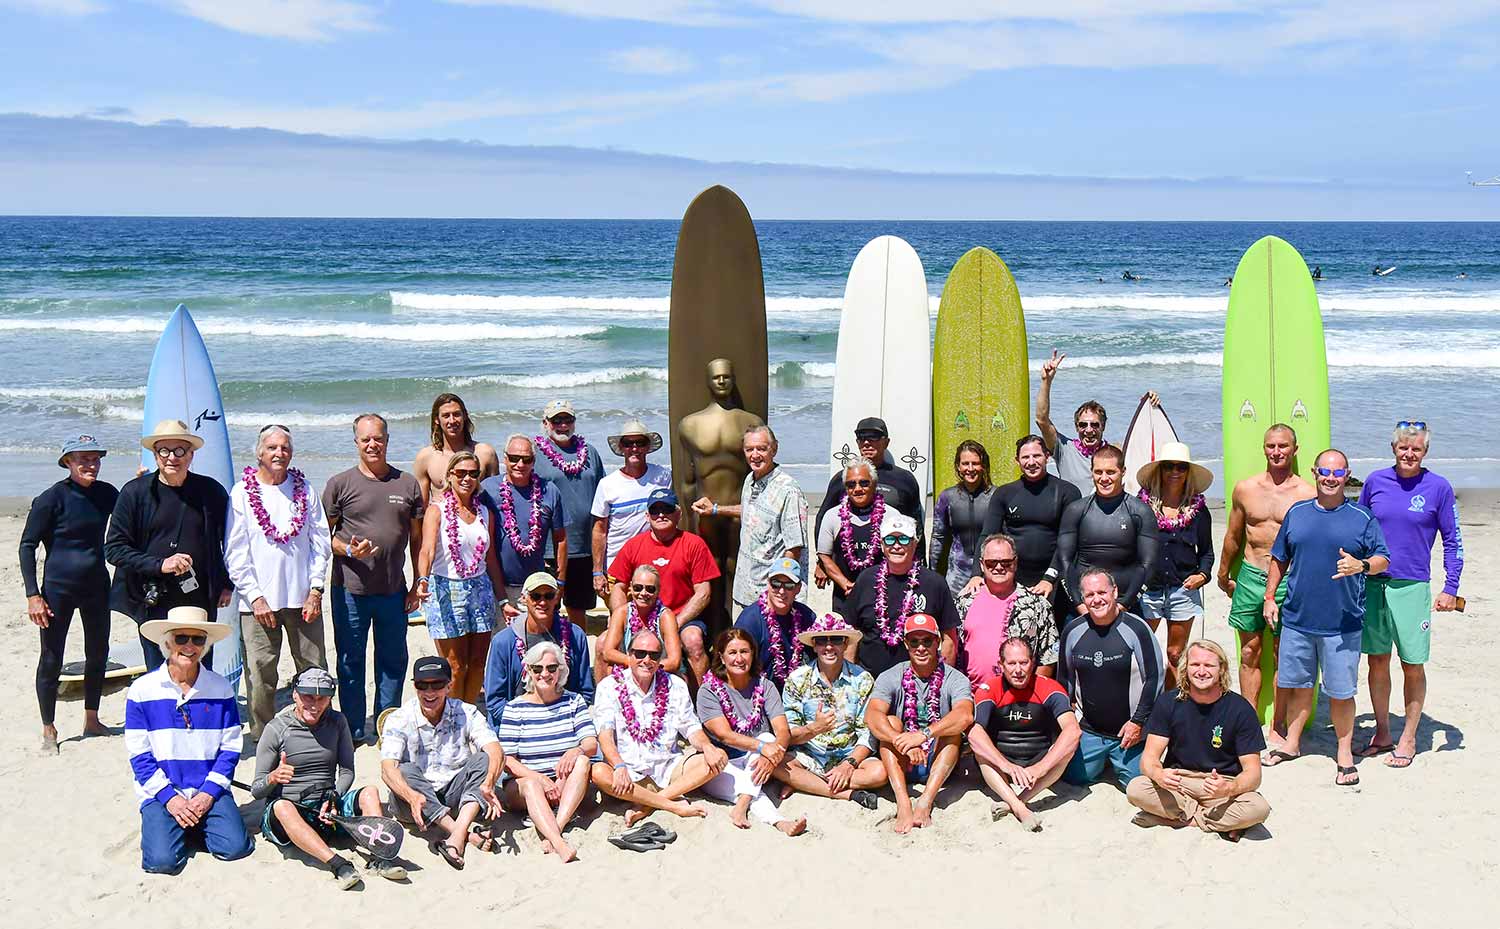 2019 Luau and Legends of Surfing Invitational.